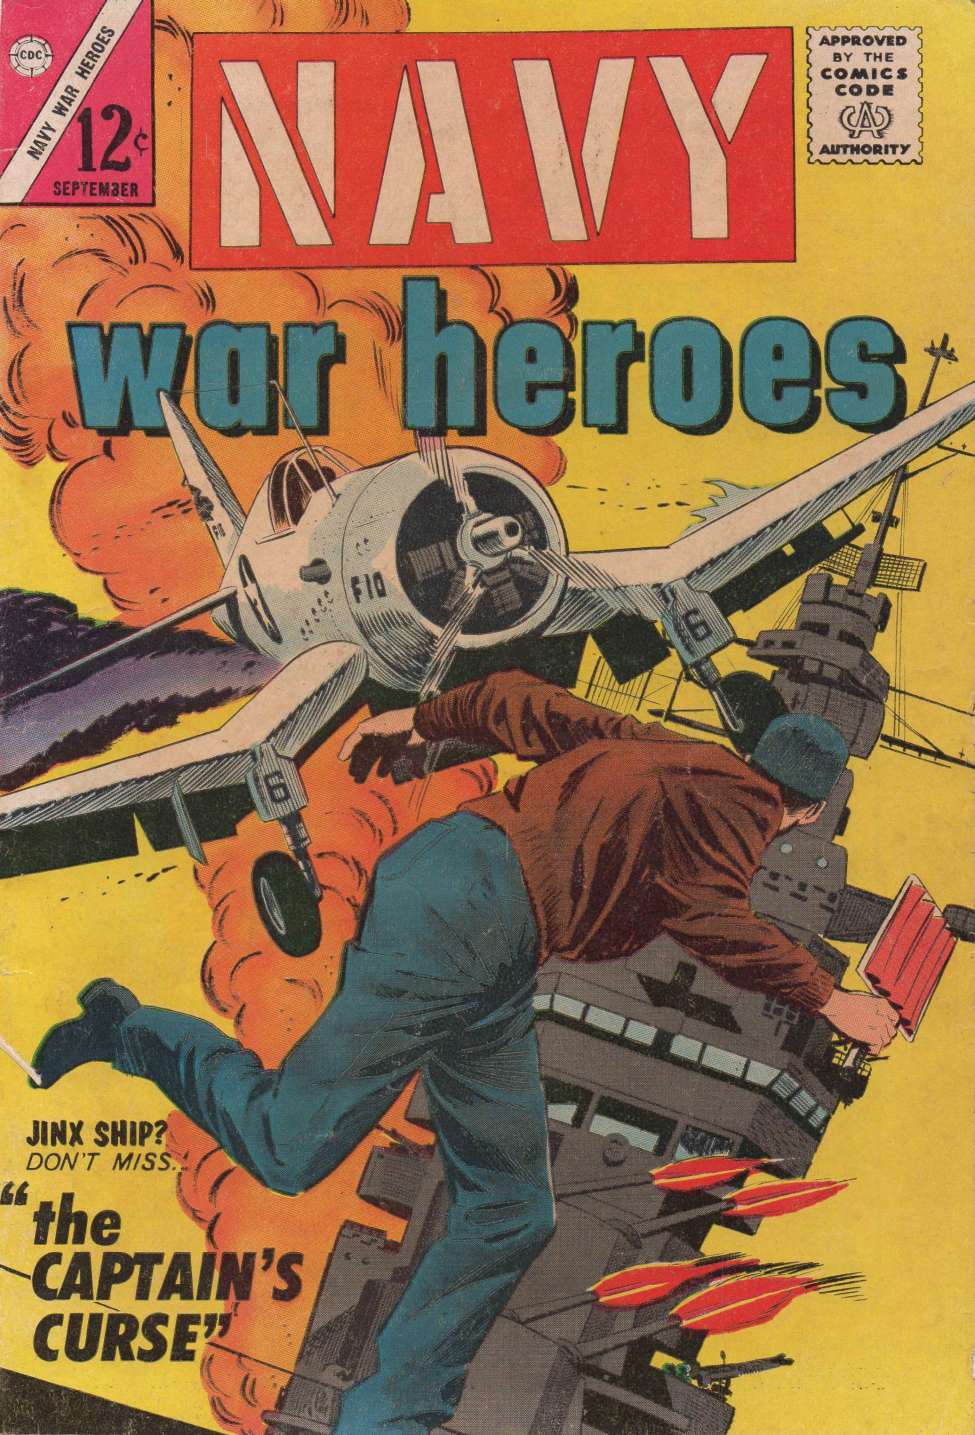 Book Cover For Navy War Heroes 4